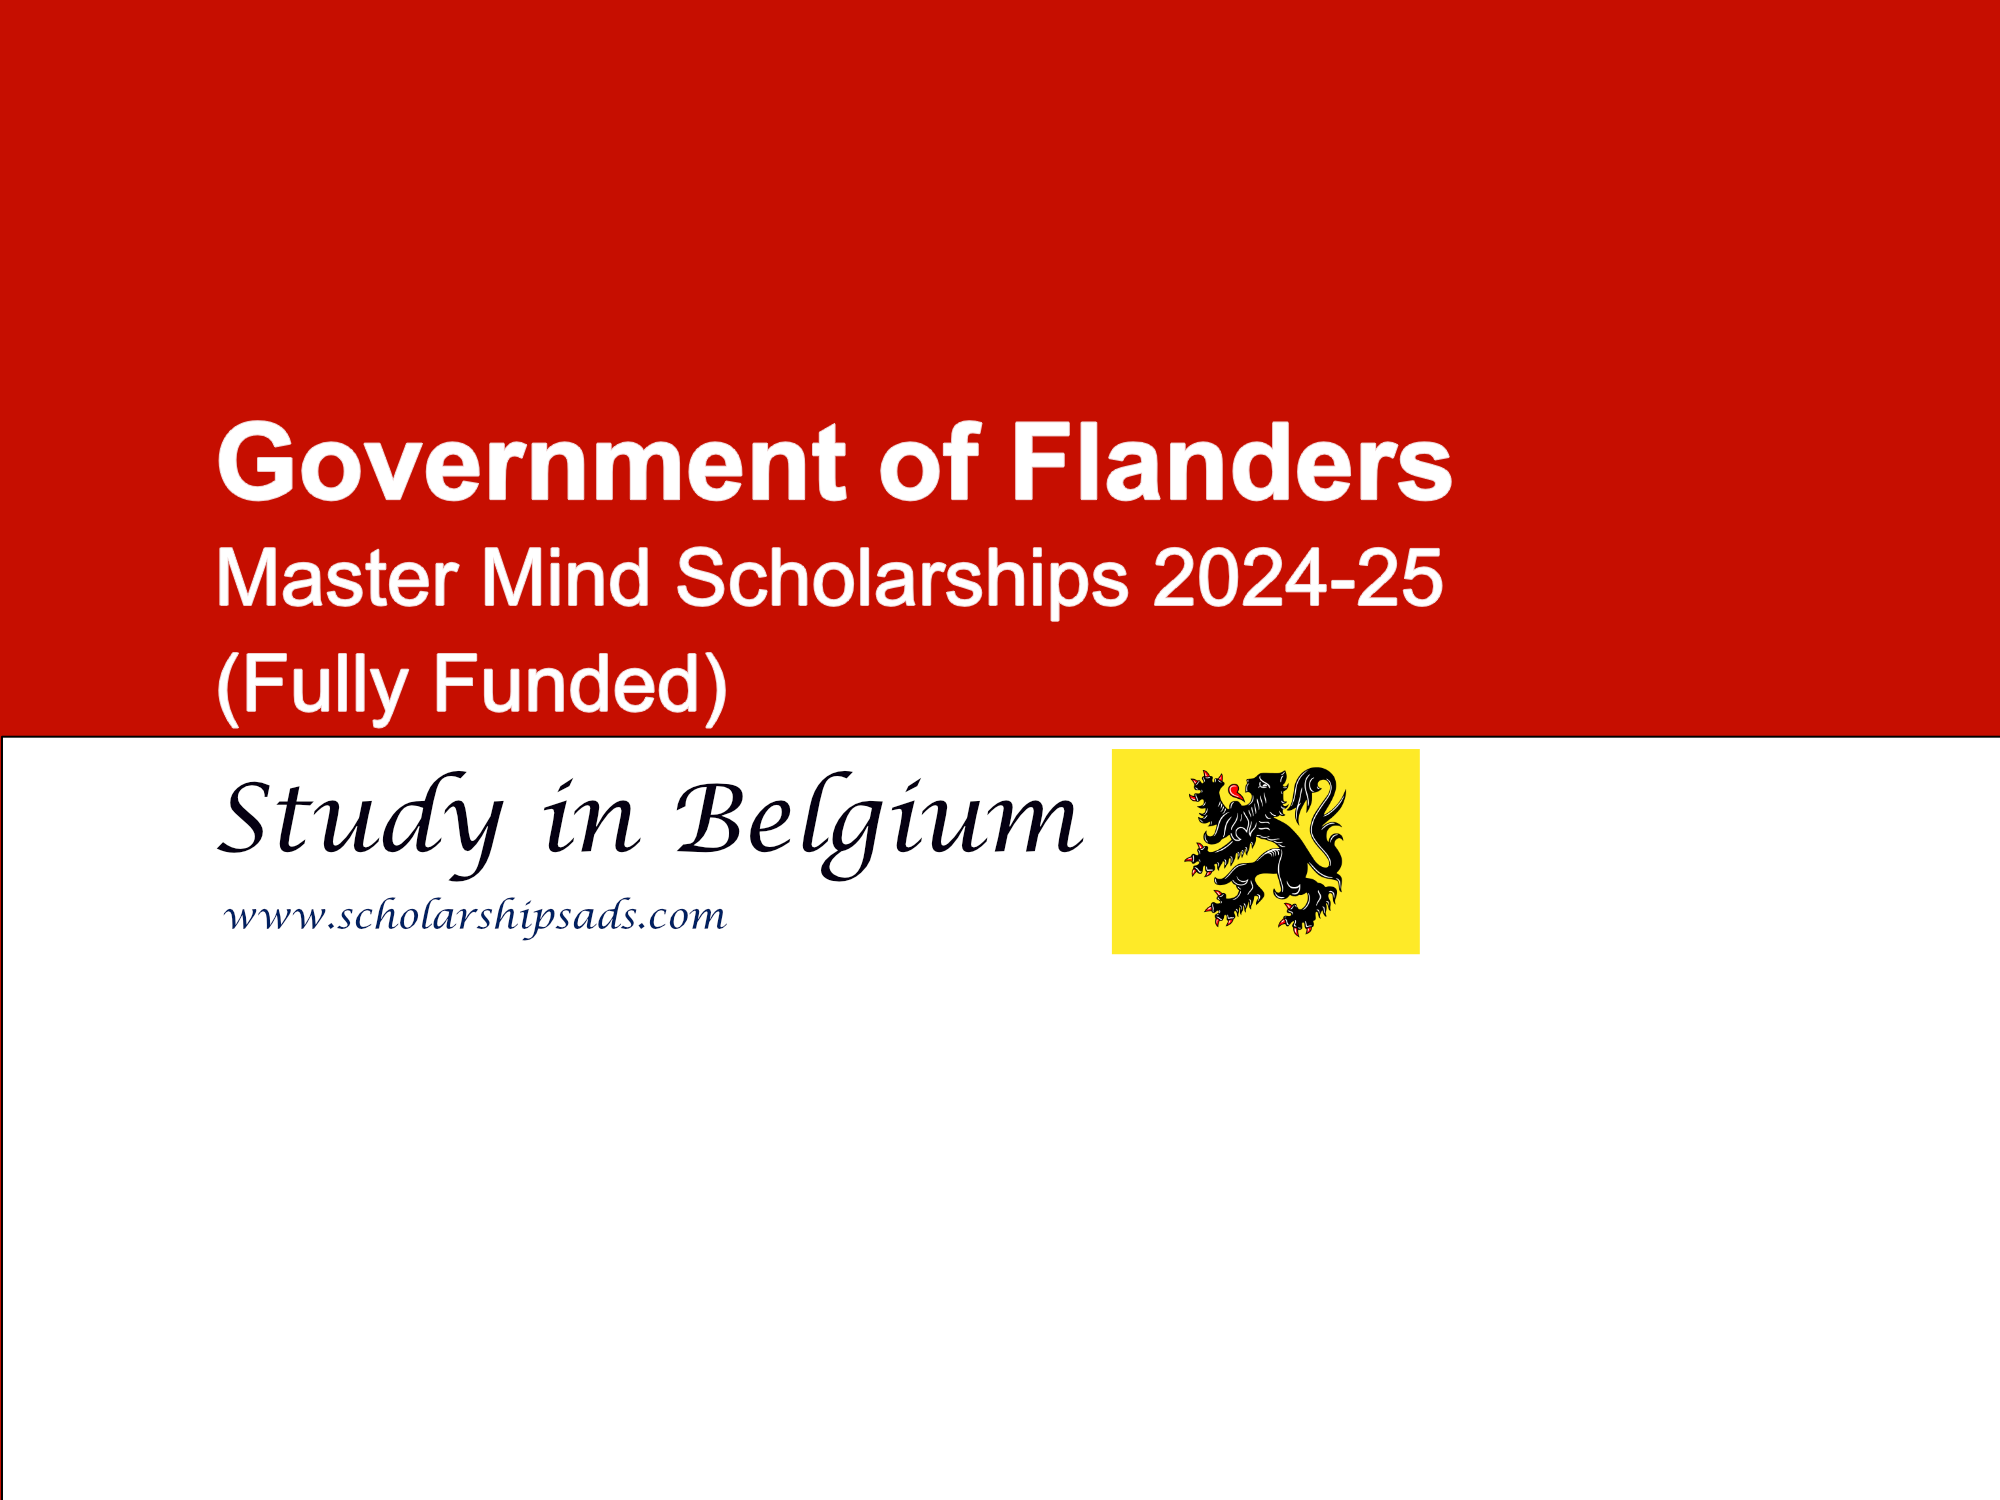 Government of Flanders Master Mind Scholarships 2024-25, Belgium. (Fully Funded)